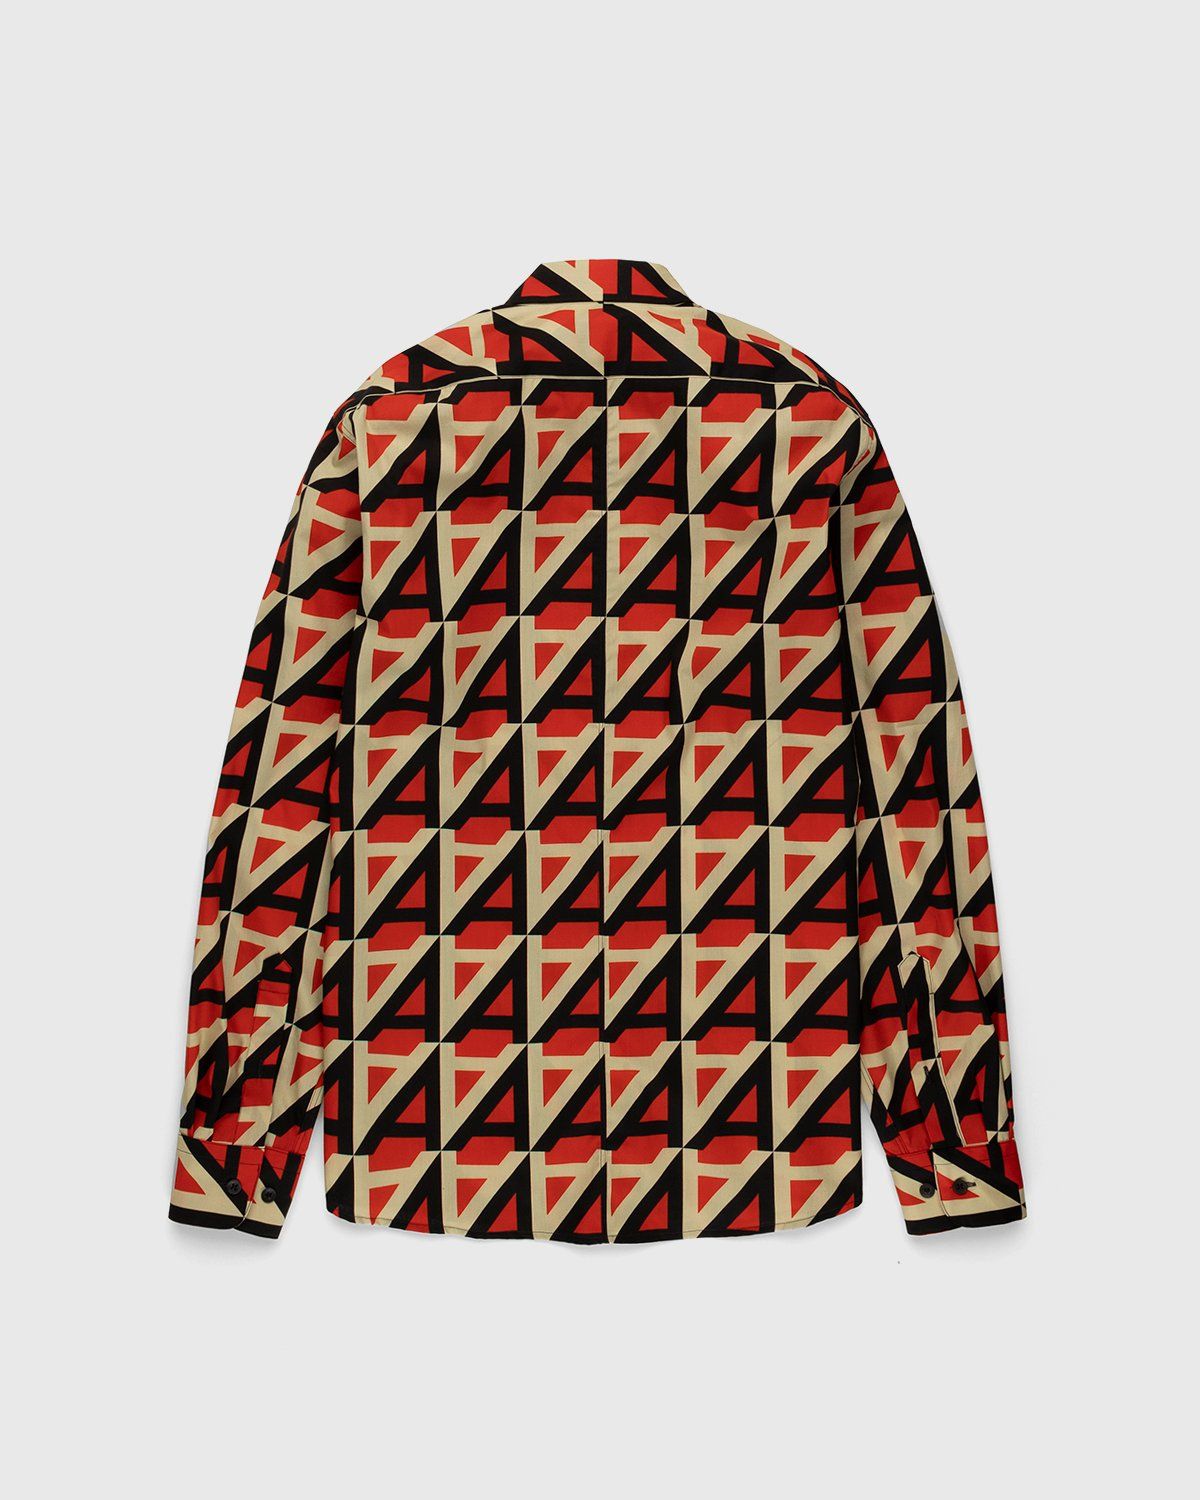 Dries van Noten – Curle "A" Shirt Red - Shirts - Red - Image 2